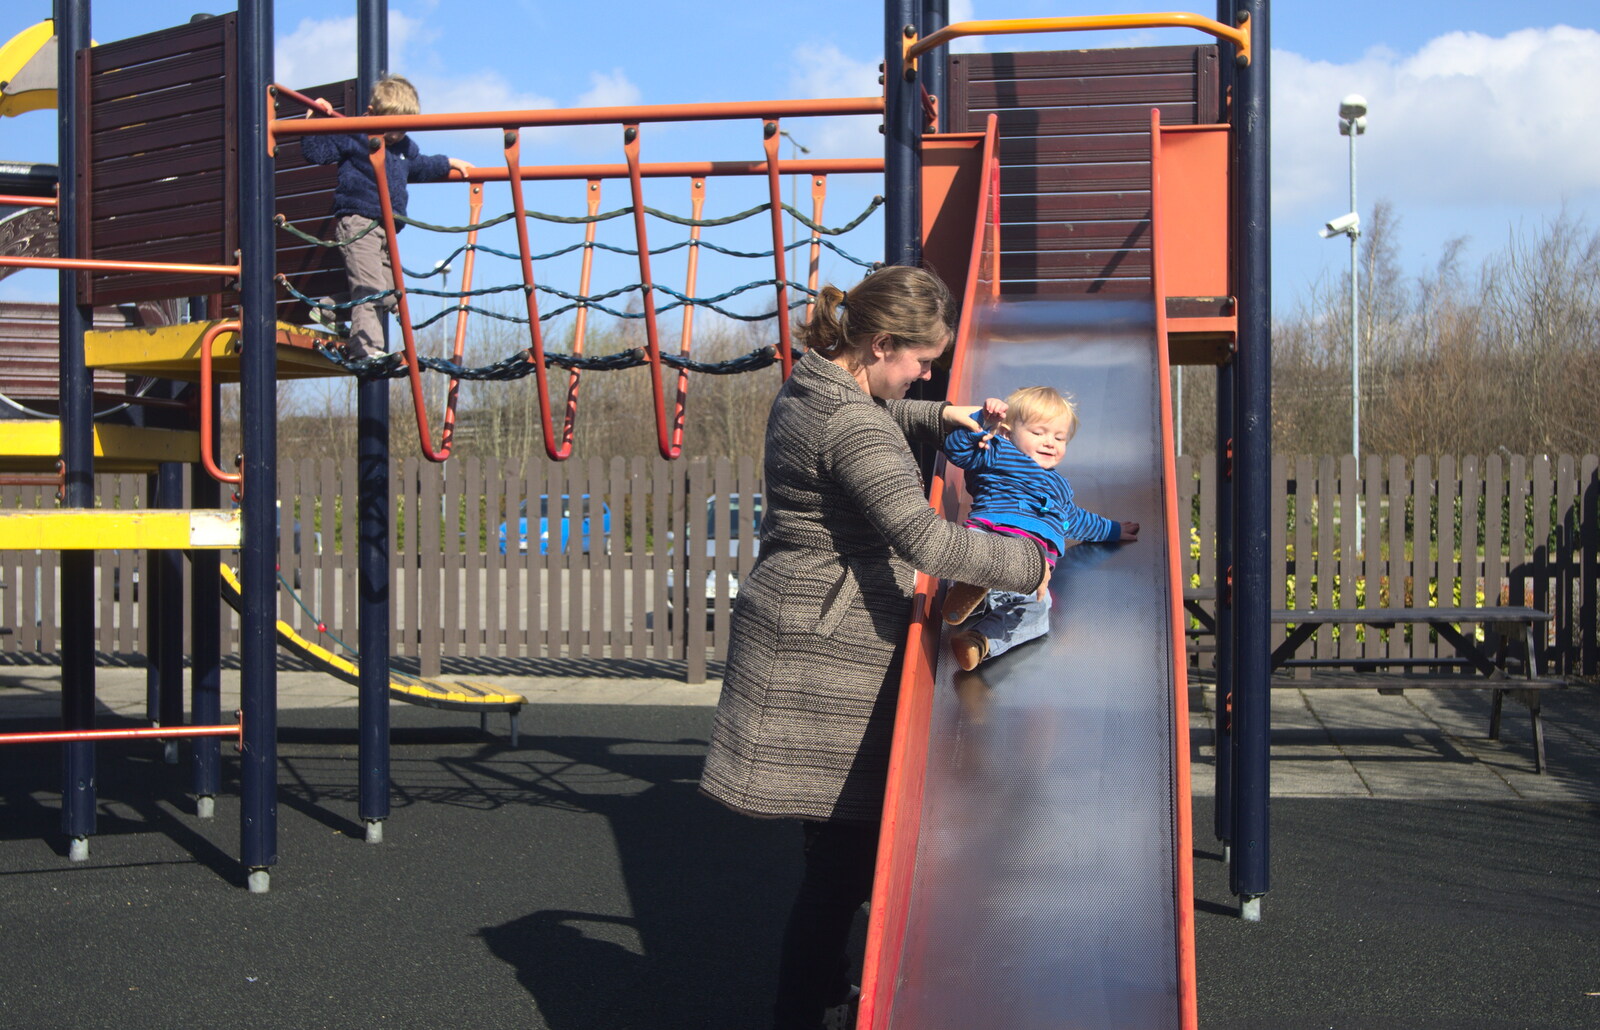 Harry has a slide from Chesterfield and the Twisty Spire, Derbyshire - 19th April 2013